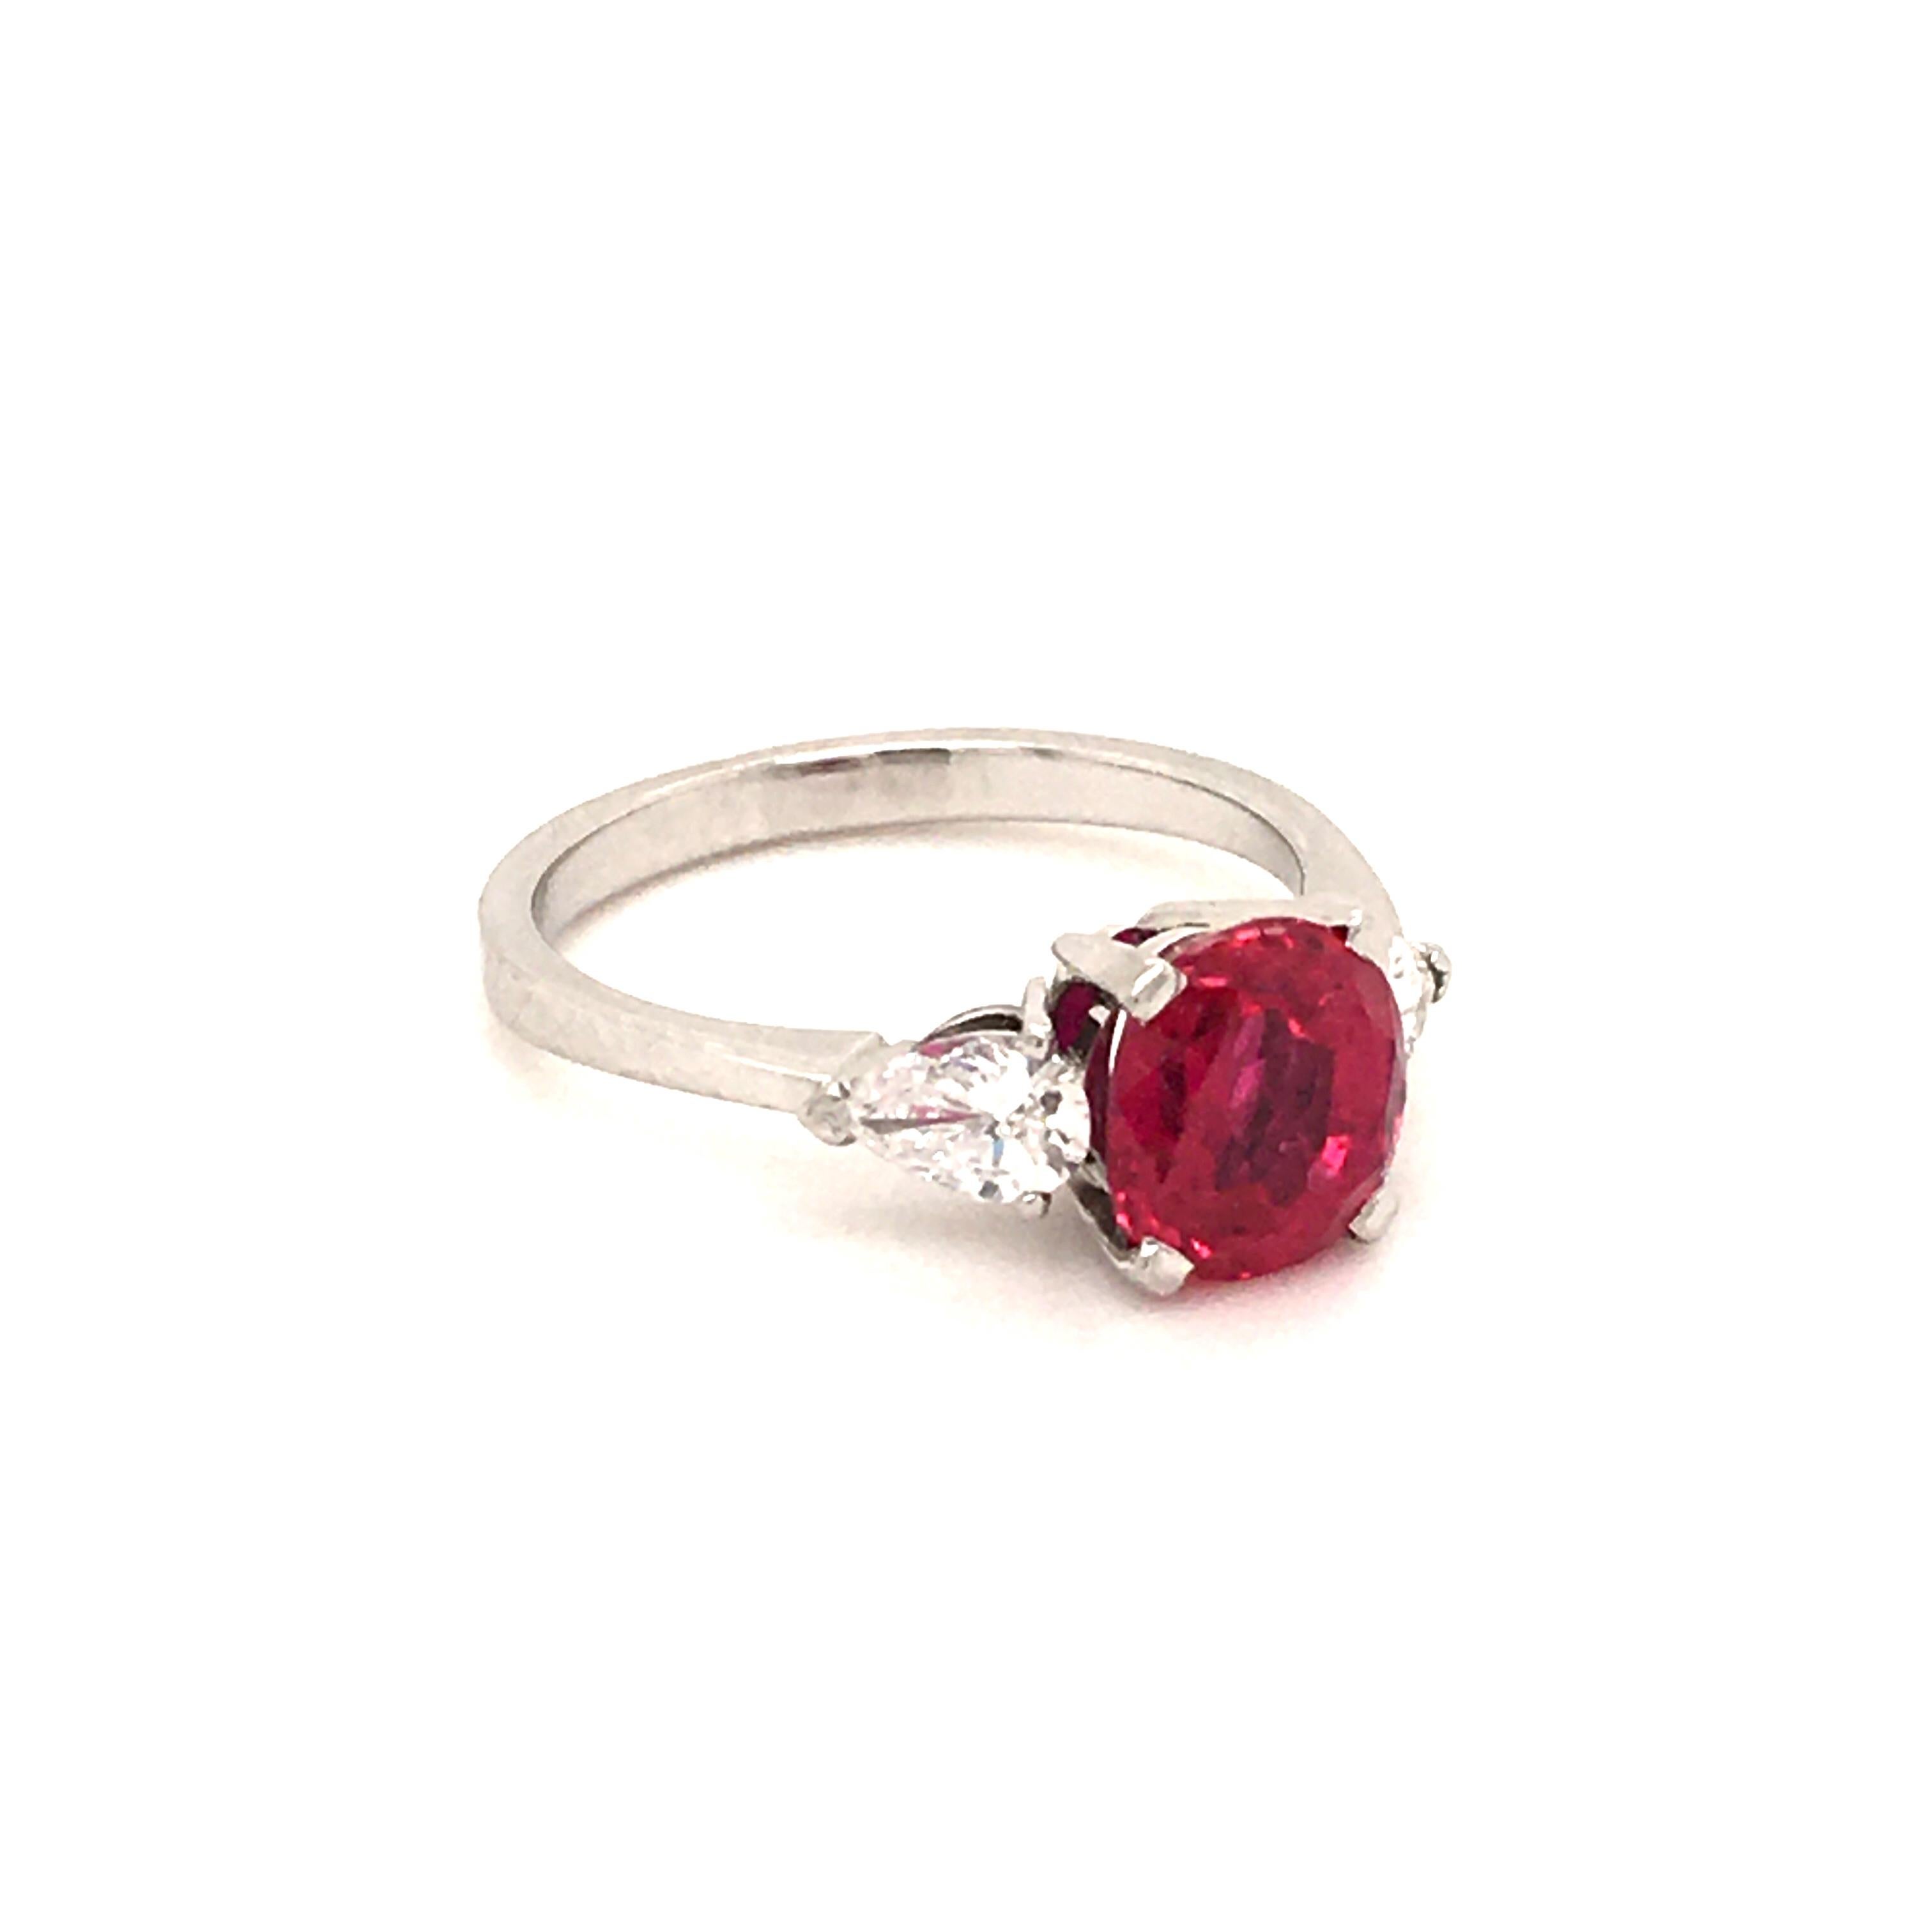 Modern Superb Gubelin Ring with a 2.35 Carat Untreated Burmese Ruby and Diamonds